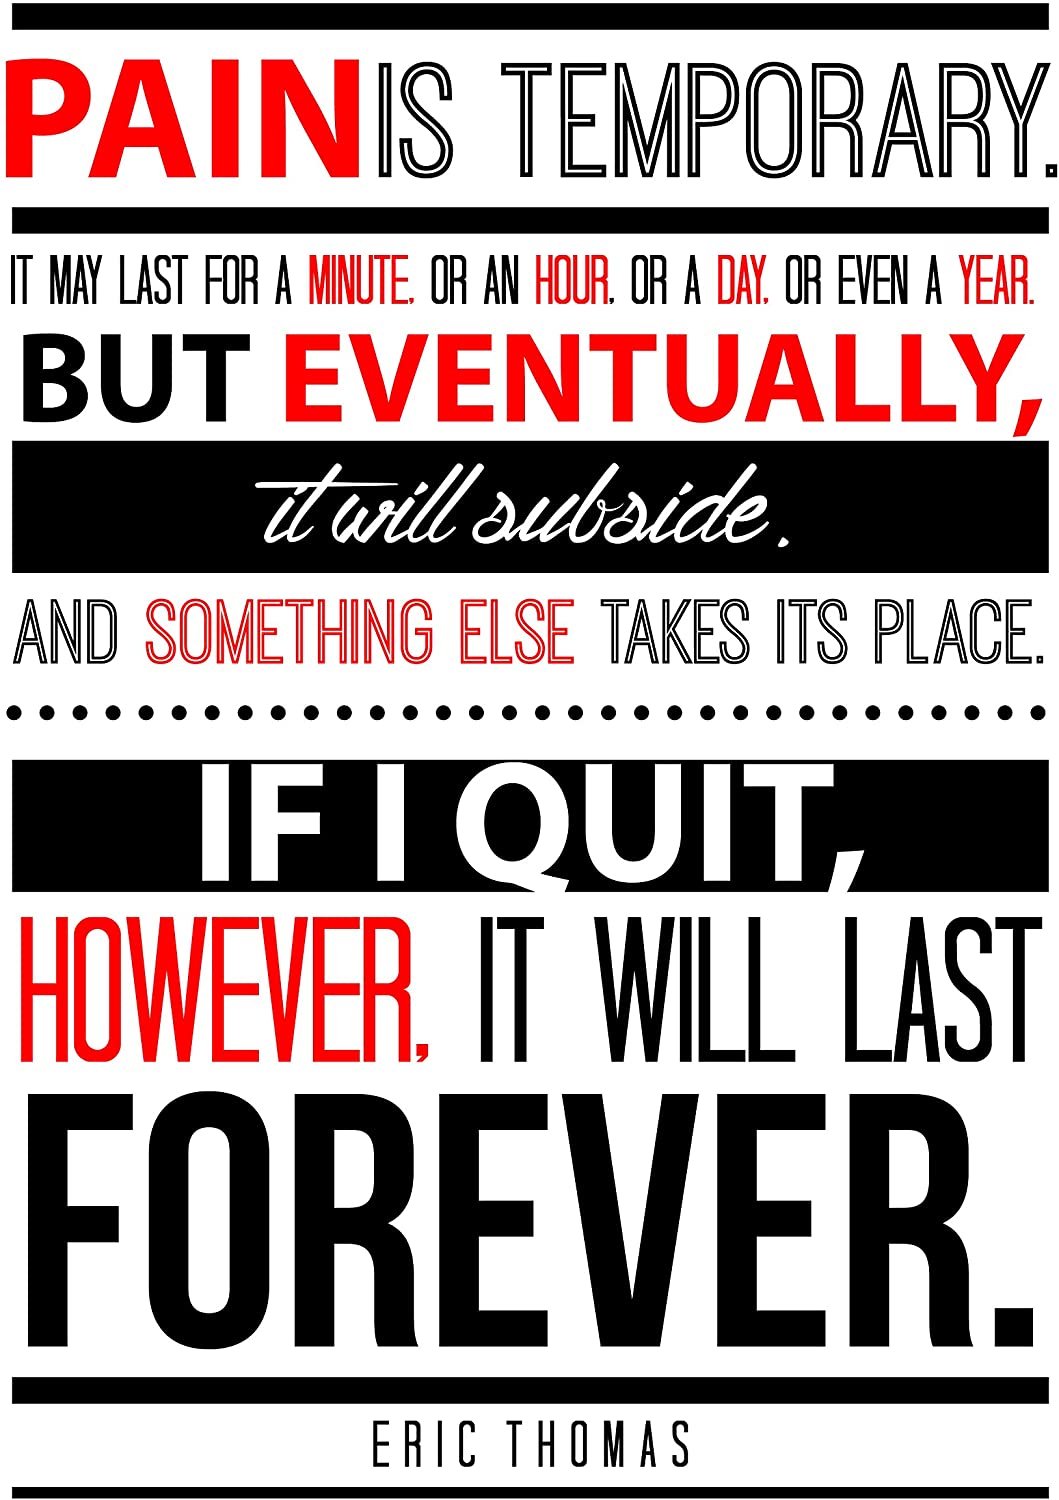 Eric Thomas Quote Pain Is Temporary Motivational Quote Wall Art Print, Typographic, Typography Poster, Illustration, Modern Home Décor 11x14 Print: Amazon.ca: Home & Kitchen